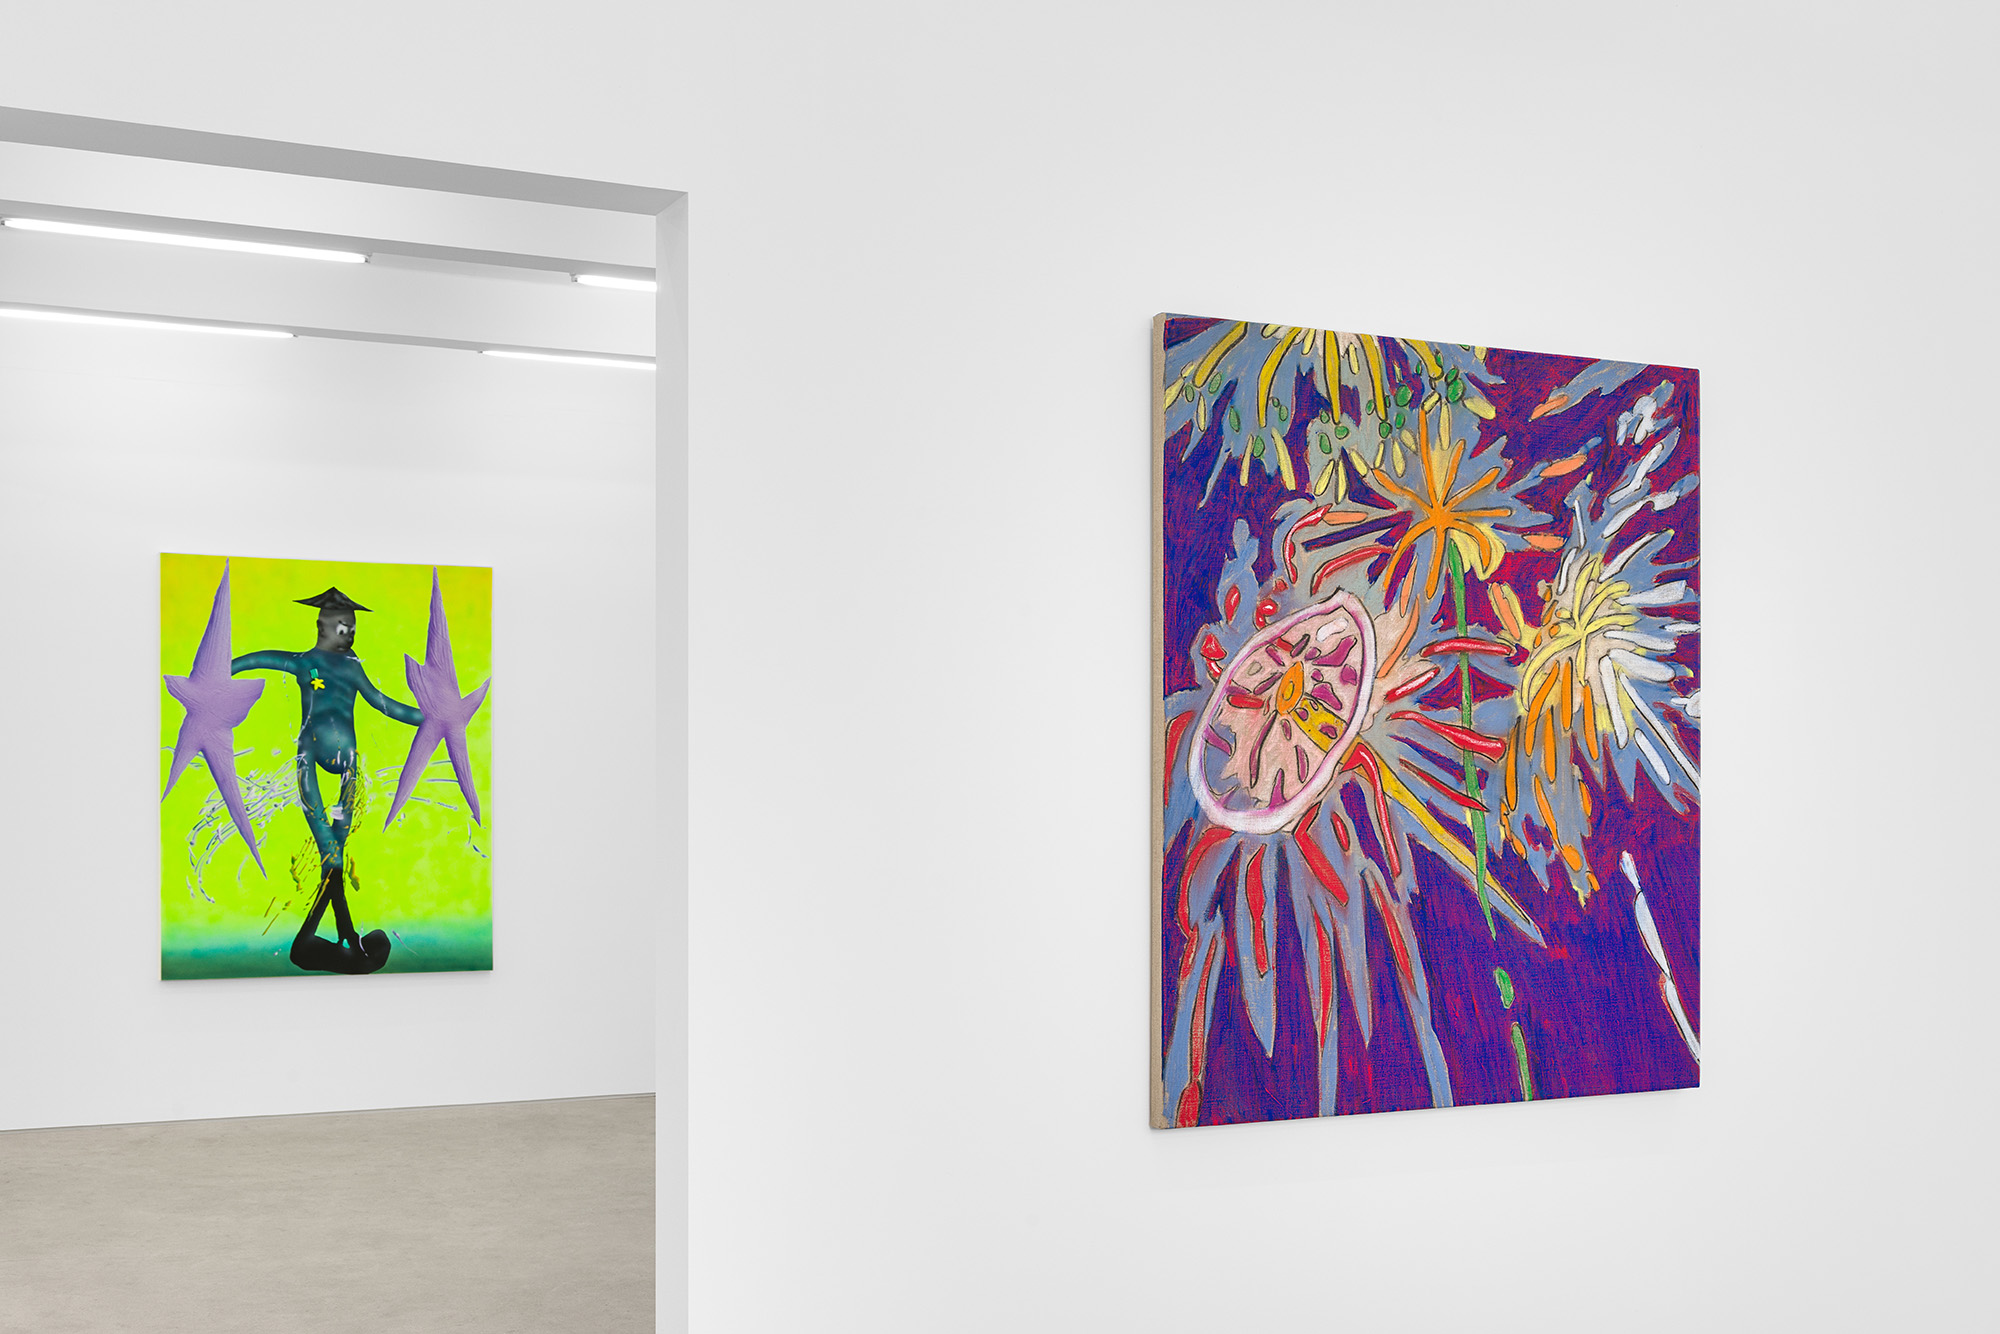 Installation view of group exhibition, Vacation II, at Gallery Vacancy, featuring works by Henry Curchod and Rao Weiyi.